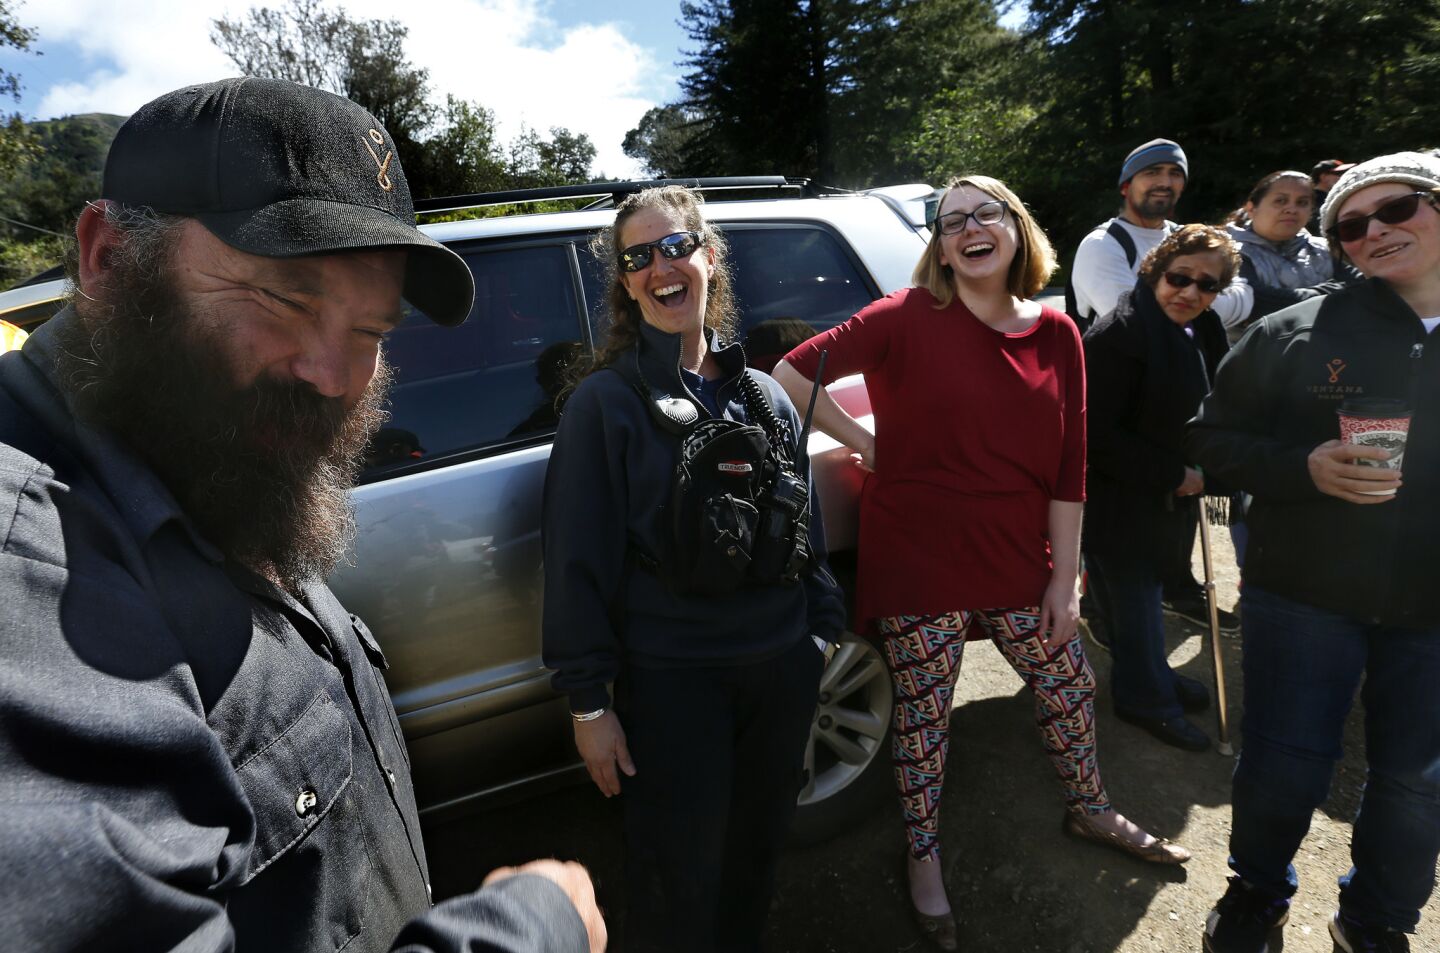 Jeannie Alexander, second from left, a medical captain with the Big Sur Volunteer Fire Brigade, enjoys a moment with other residents after she playfully touched the beard of Josh Case, left, an employee at the Ventana Inn & Spa, during a gathering of townspeople near Pfeiffer Big Sur State Park.